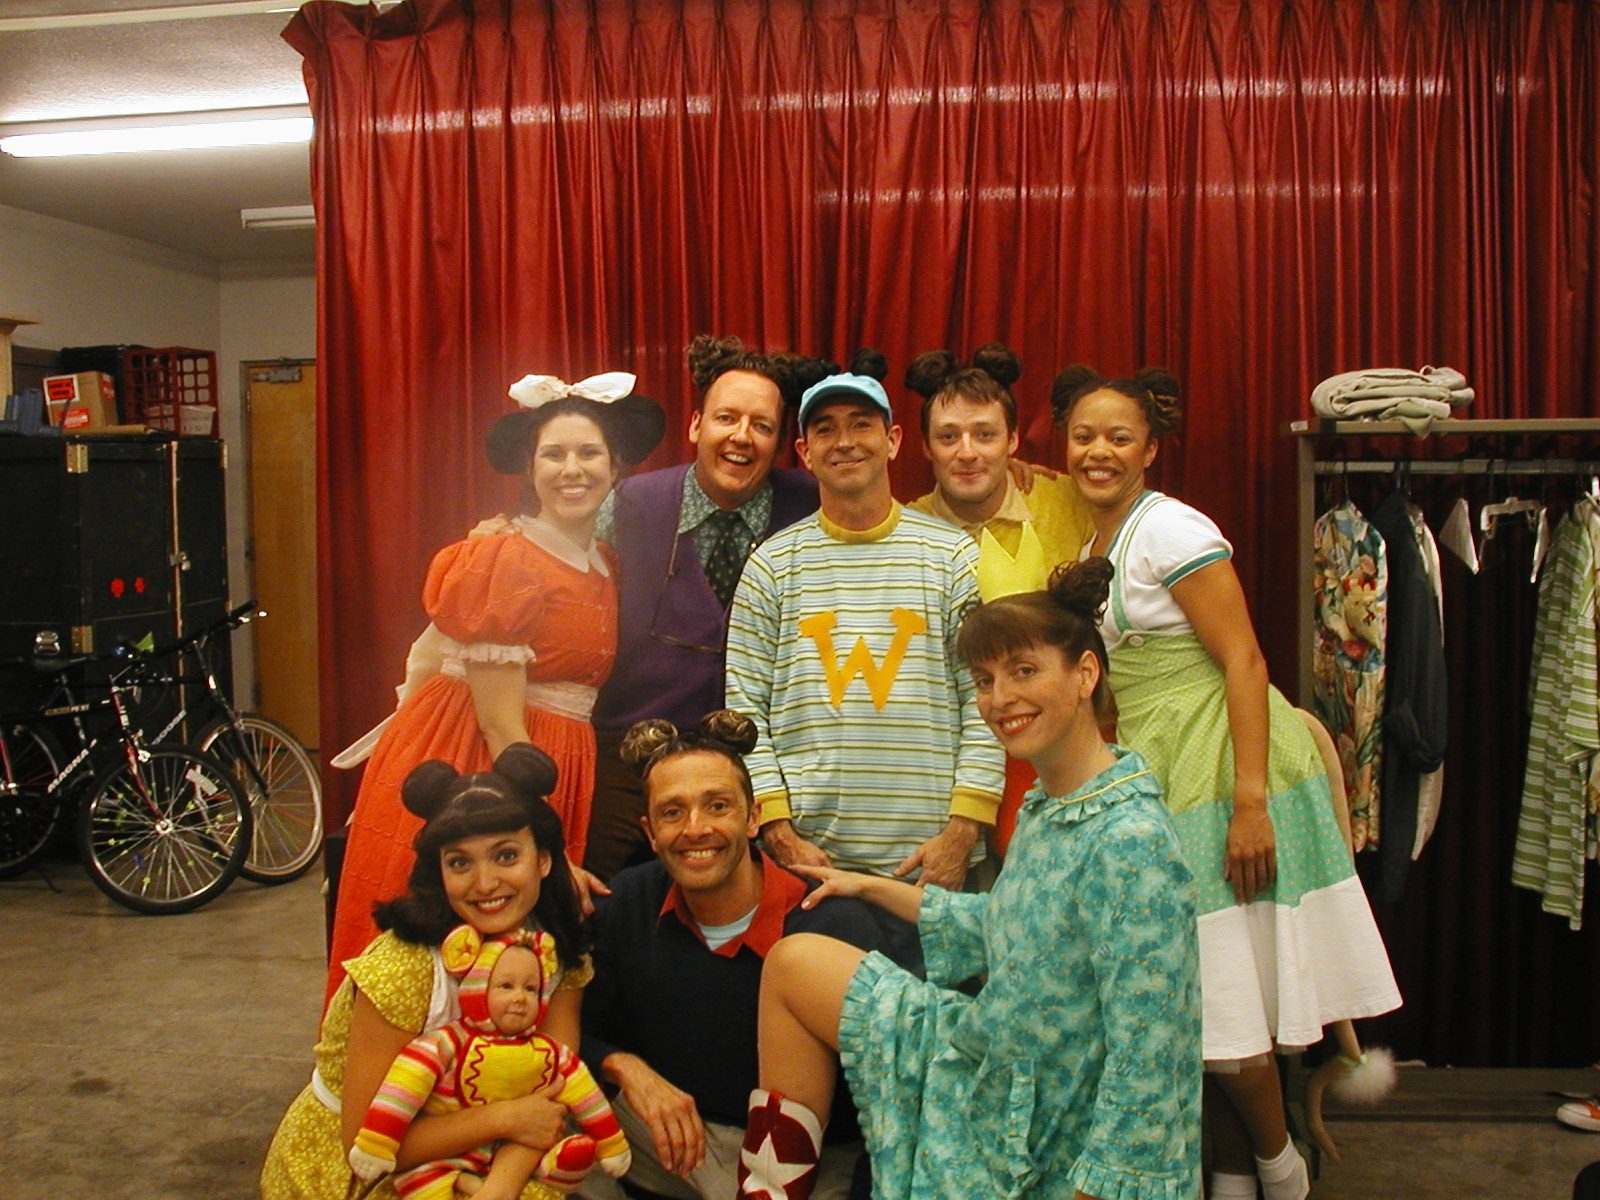 Childsplay, "Lilly's Purple Plastic Purse," 2002-2003. Top: Andrea Morales, D. Scott Withers, Jon Gentry, Kyle Sorrell, Kimberly Morgan. Bottom: Angelica Howland, Creepy Mouse Baby (in Angelica's arms), Dwayne Hartford, Katie McFadzen. (Photo from the collection of Angelica Howland)